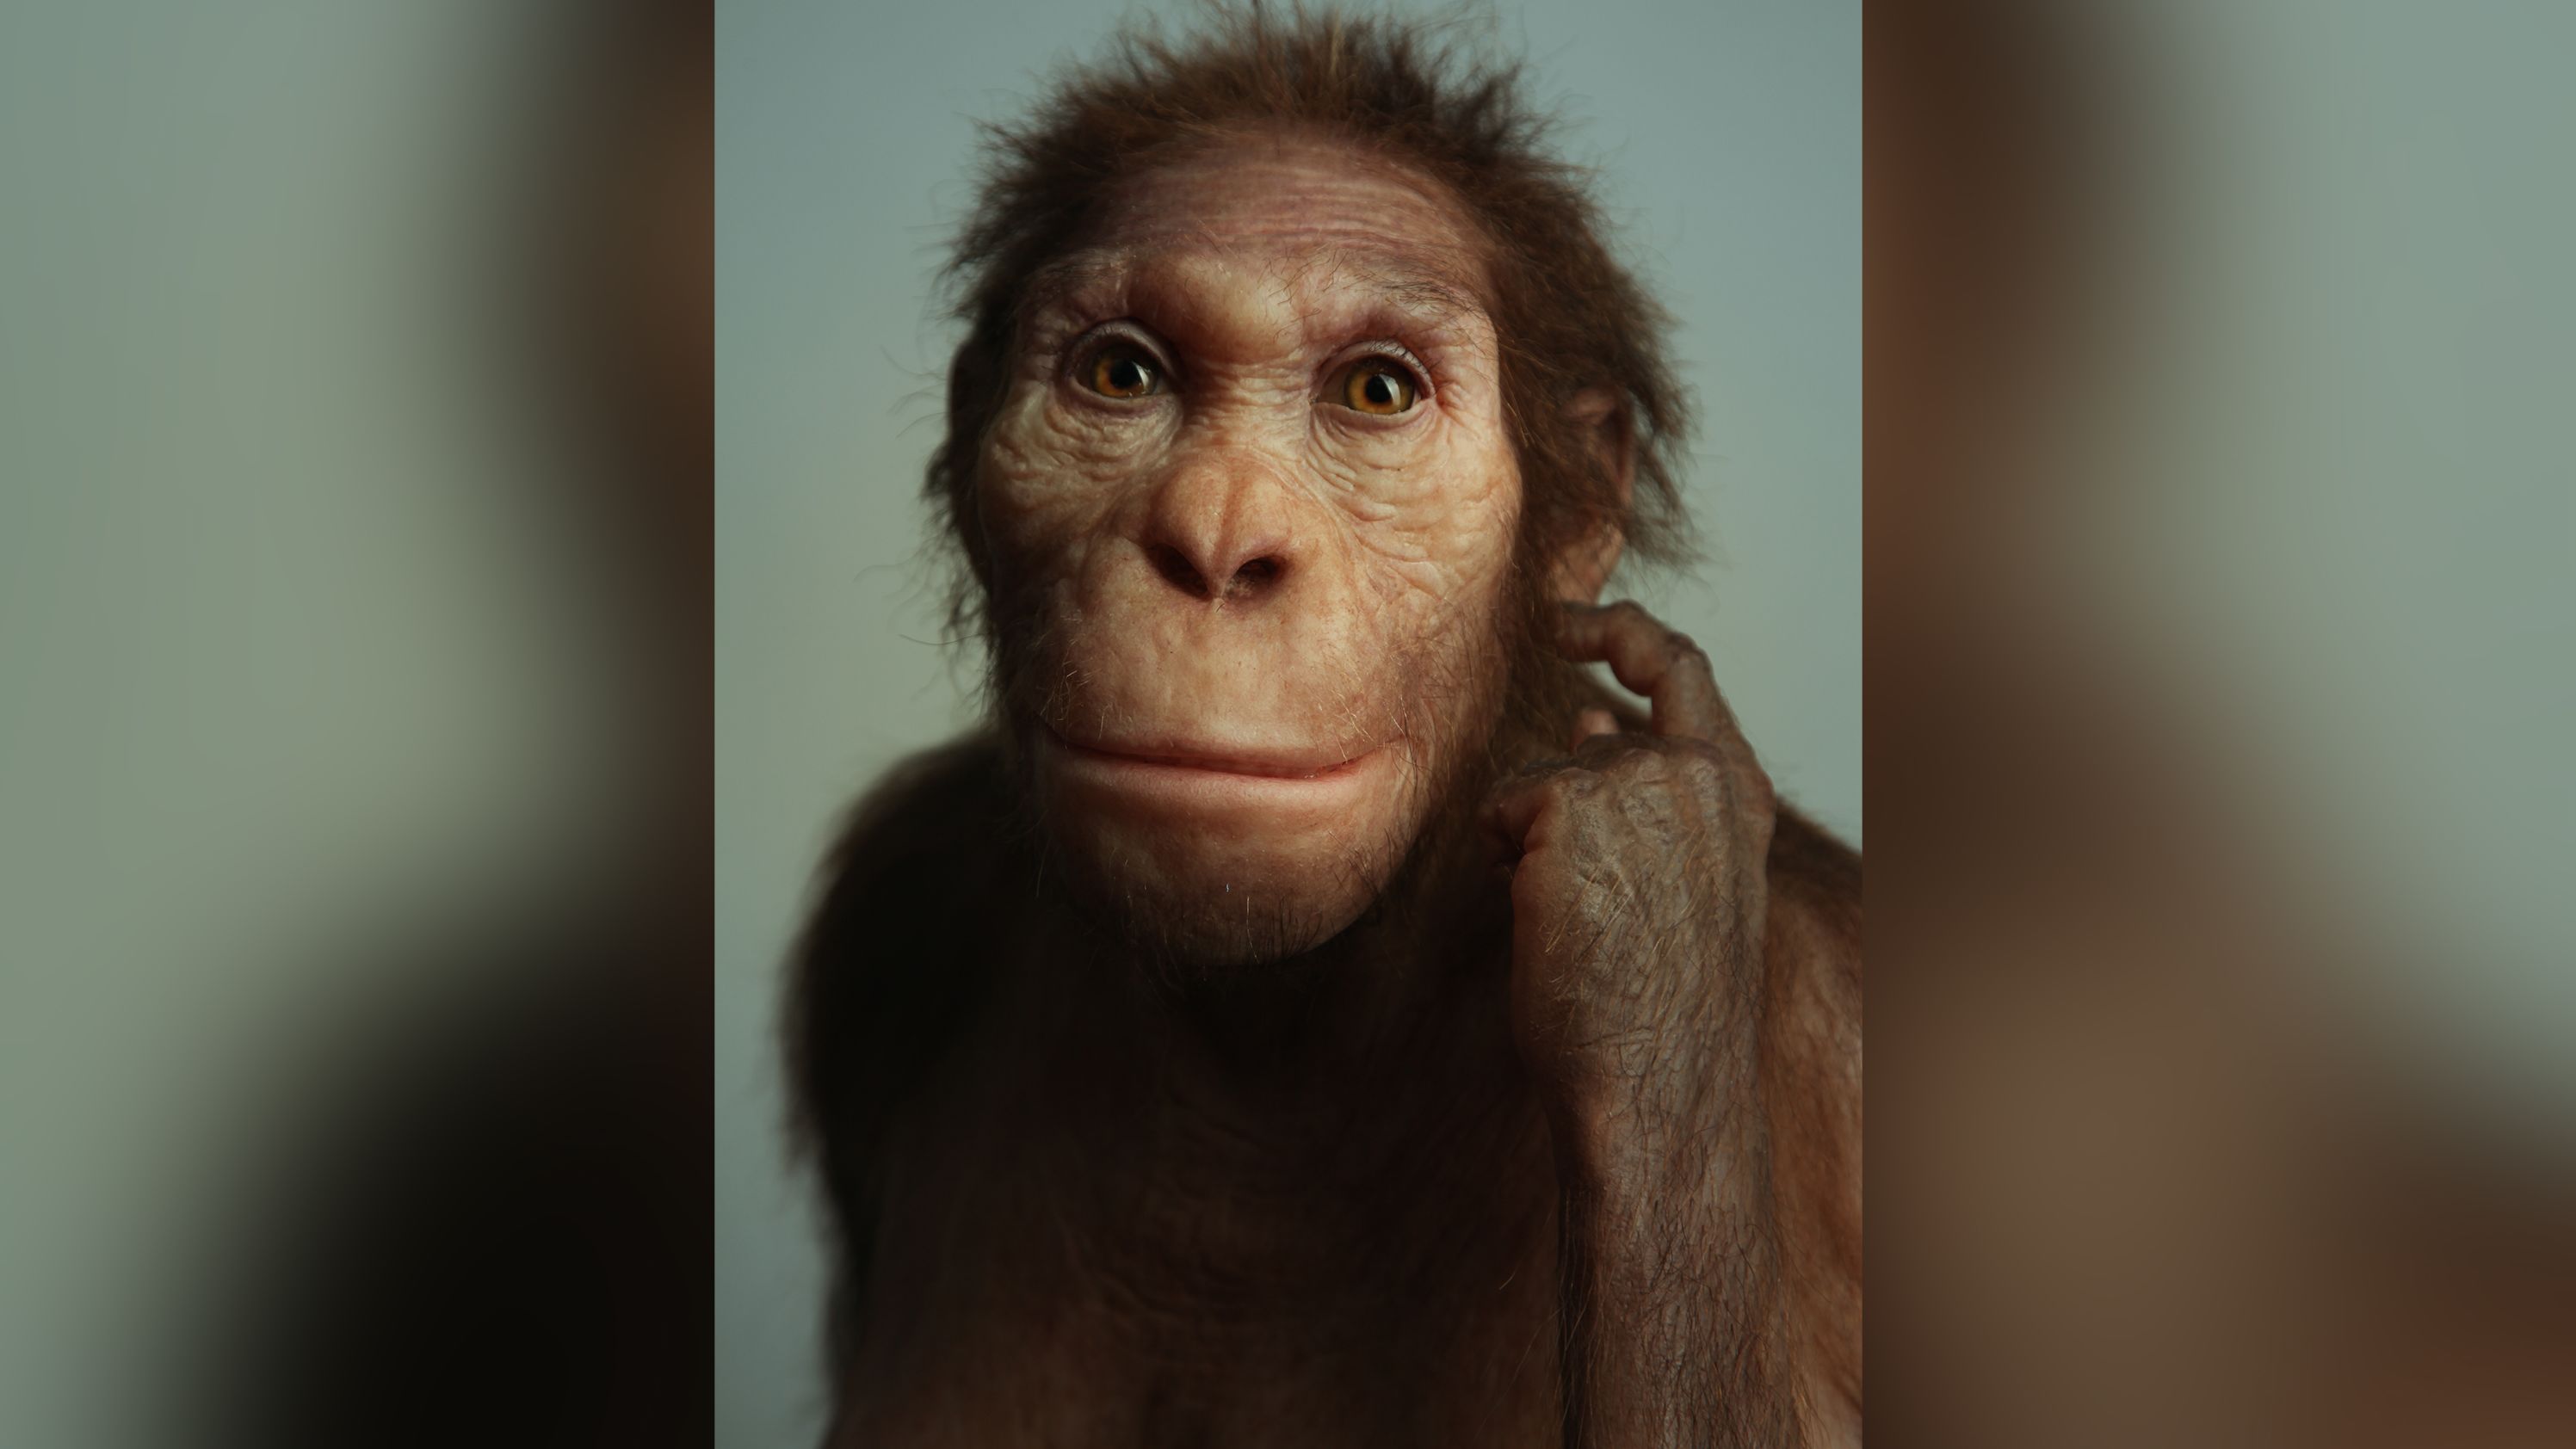 Australopithecus sediba was a transitional form of ancient human relative, a study has concluded.